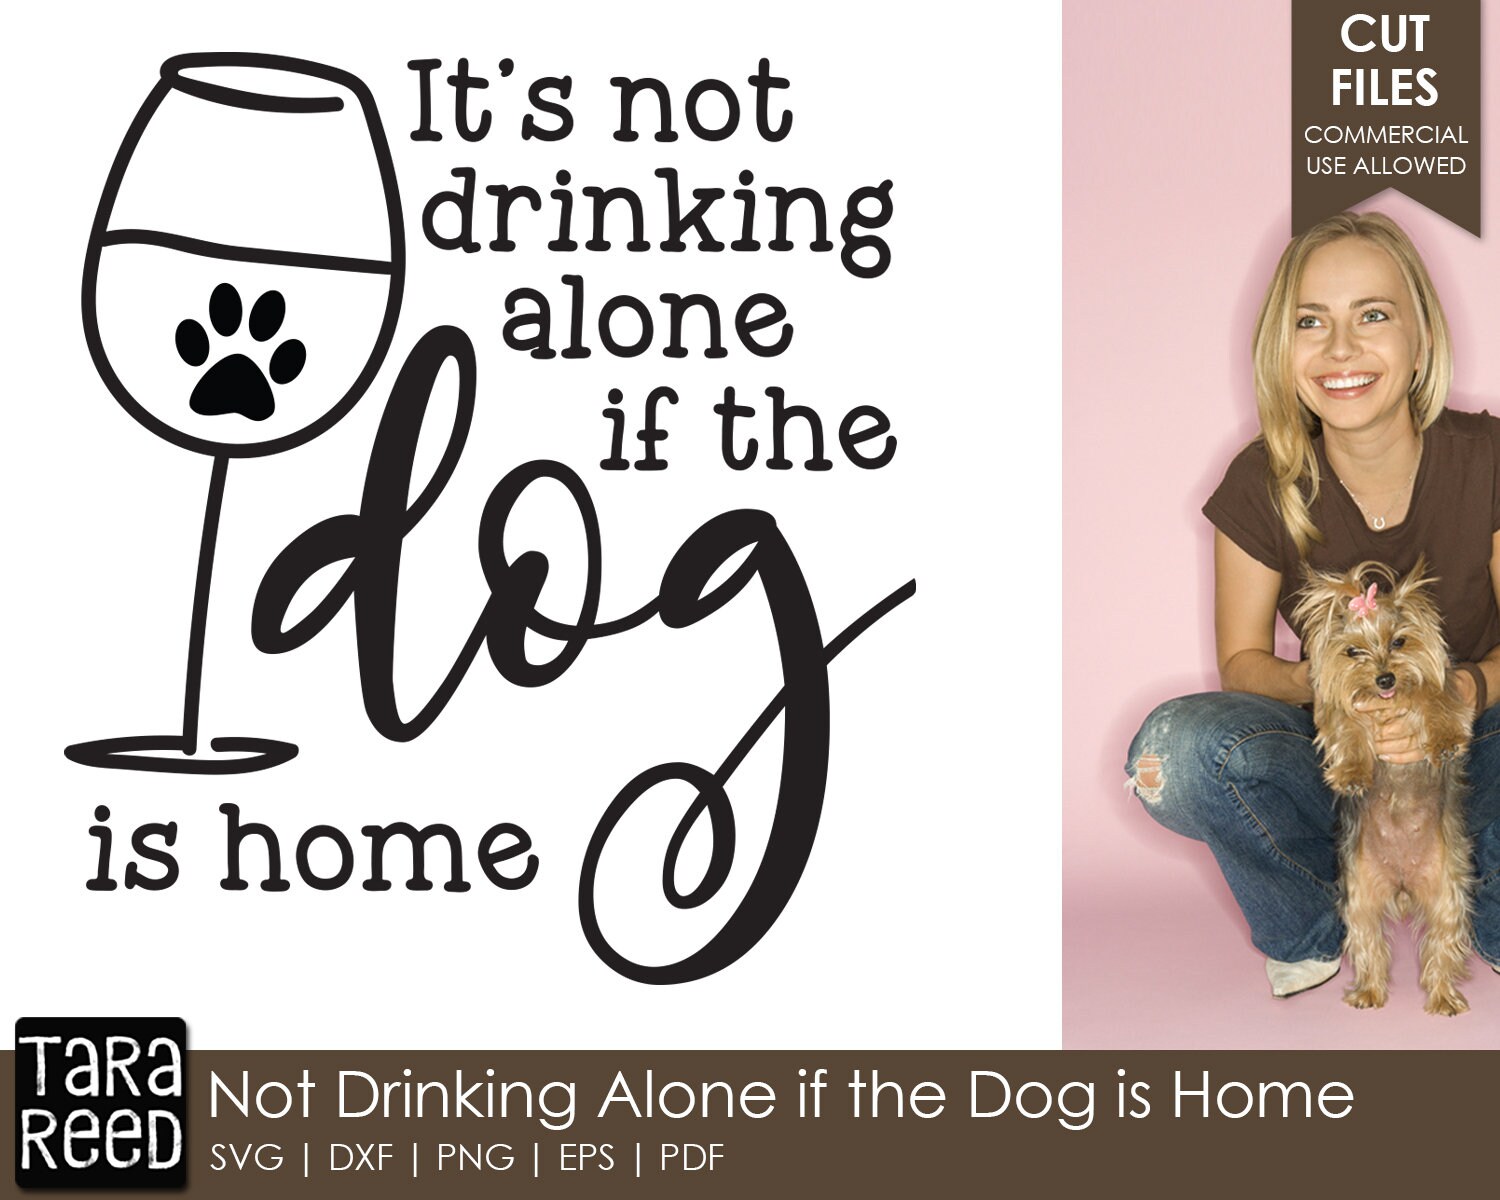 Wine Glass Jumbo 20oz Funny It's Not Drinking Alone If The DOGS Are Home 